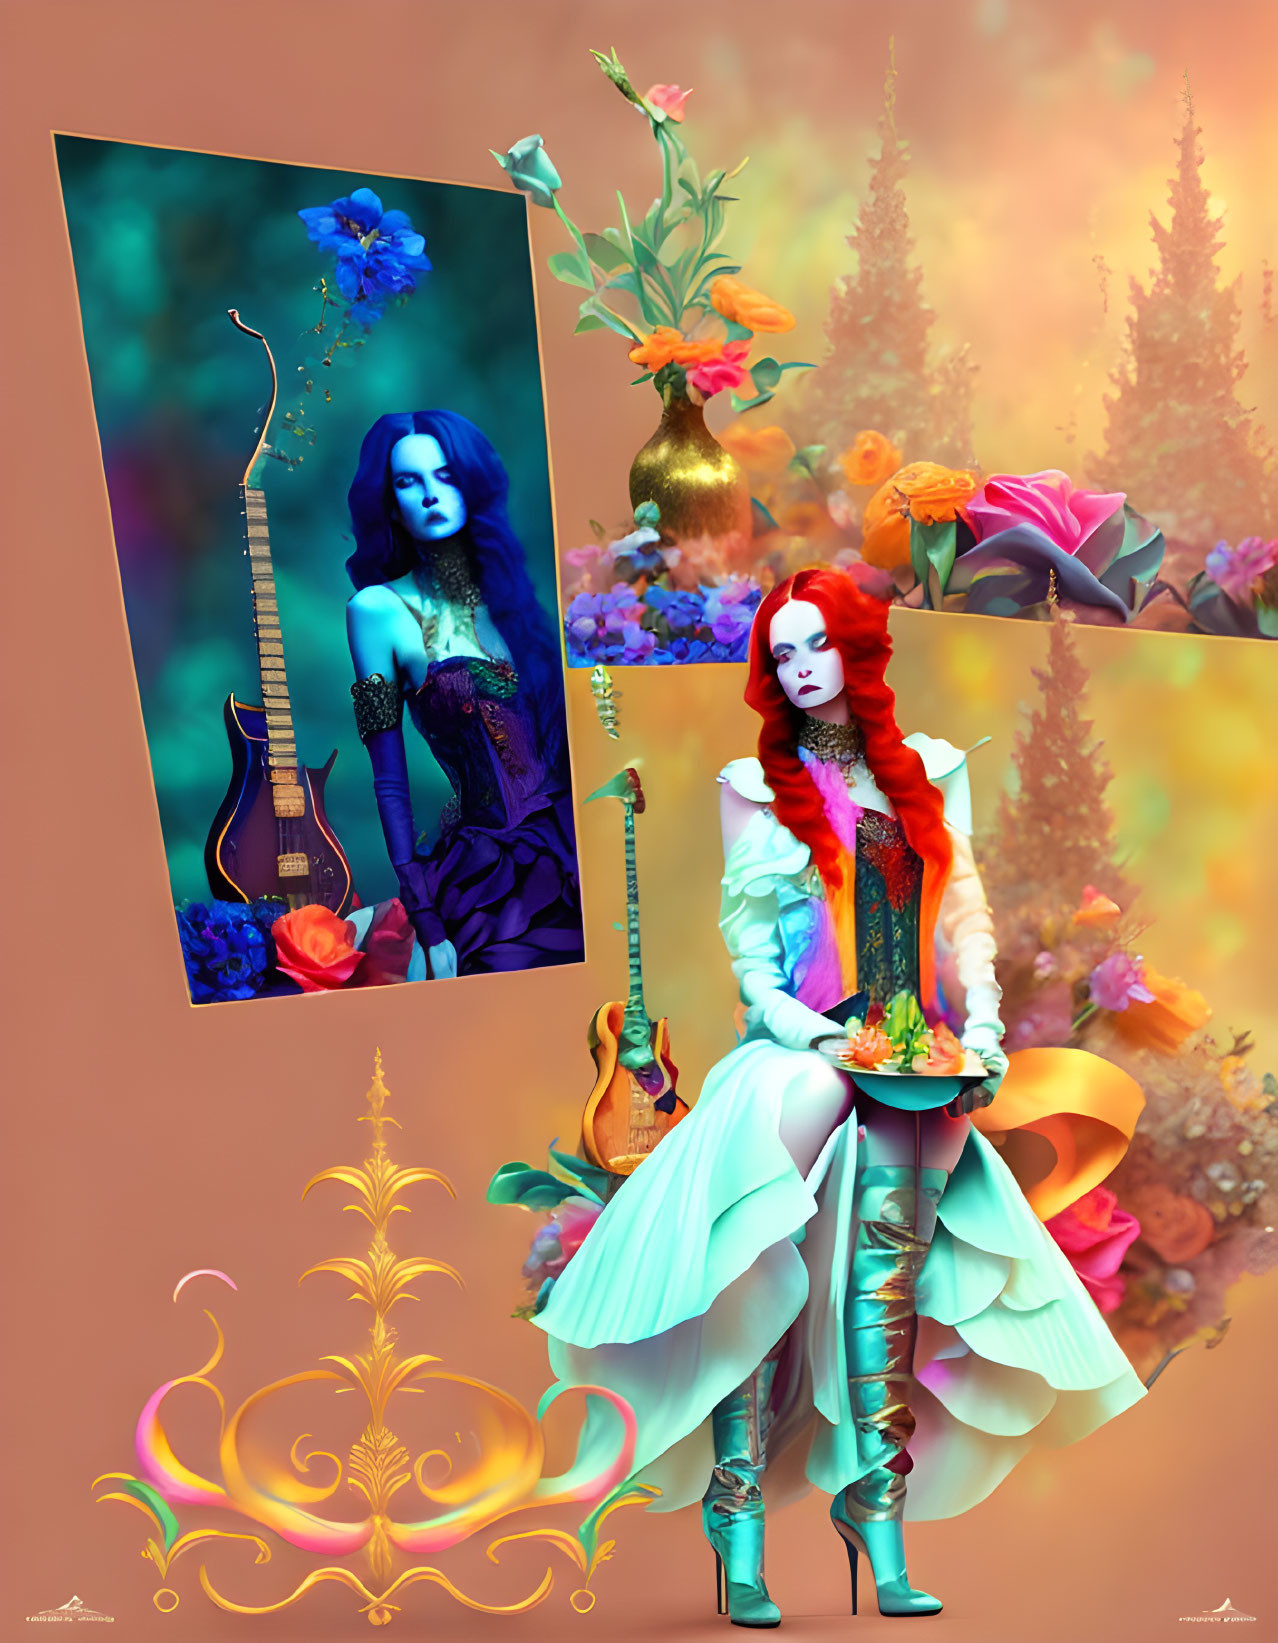 Colorful surreal artwork: Two stylized women, flowers, instruments, ornate details, warm backdrop